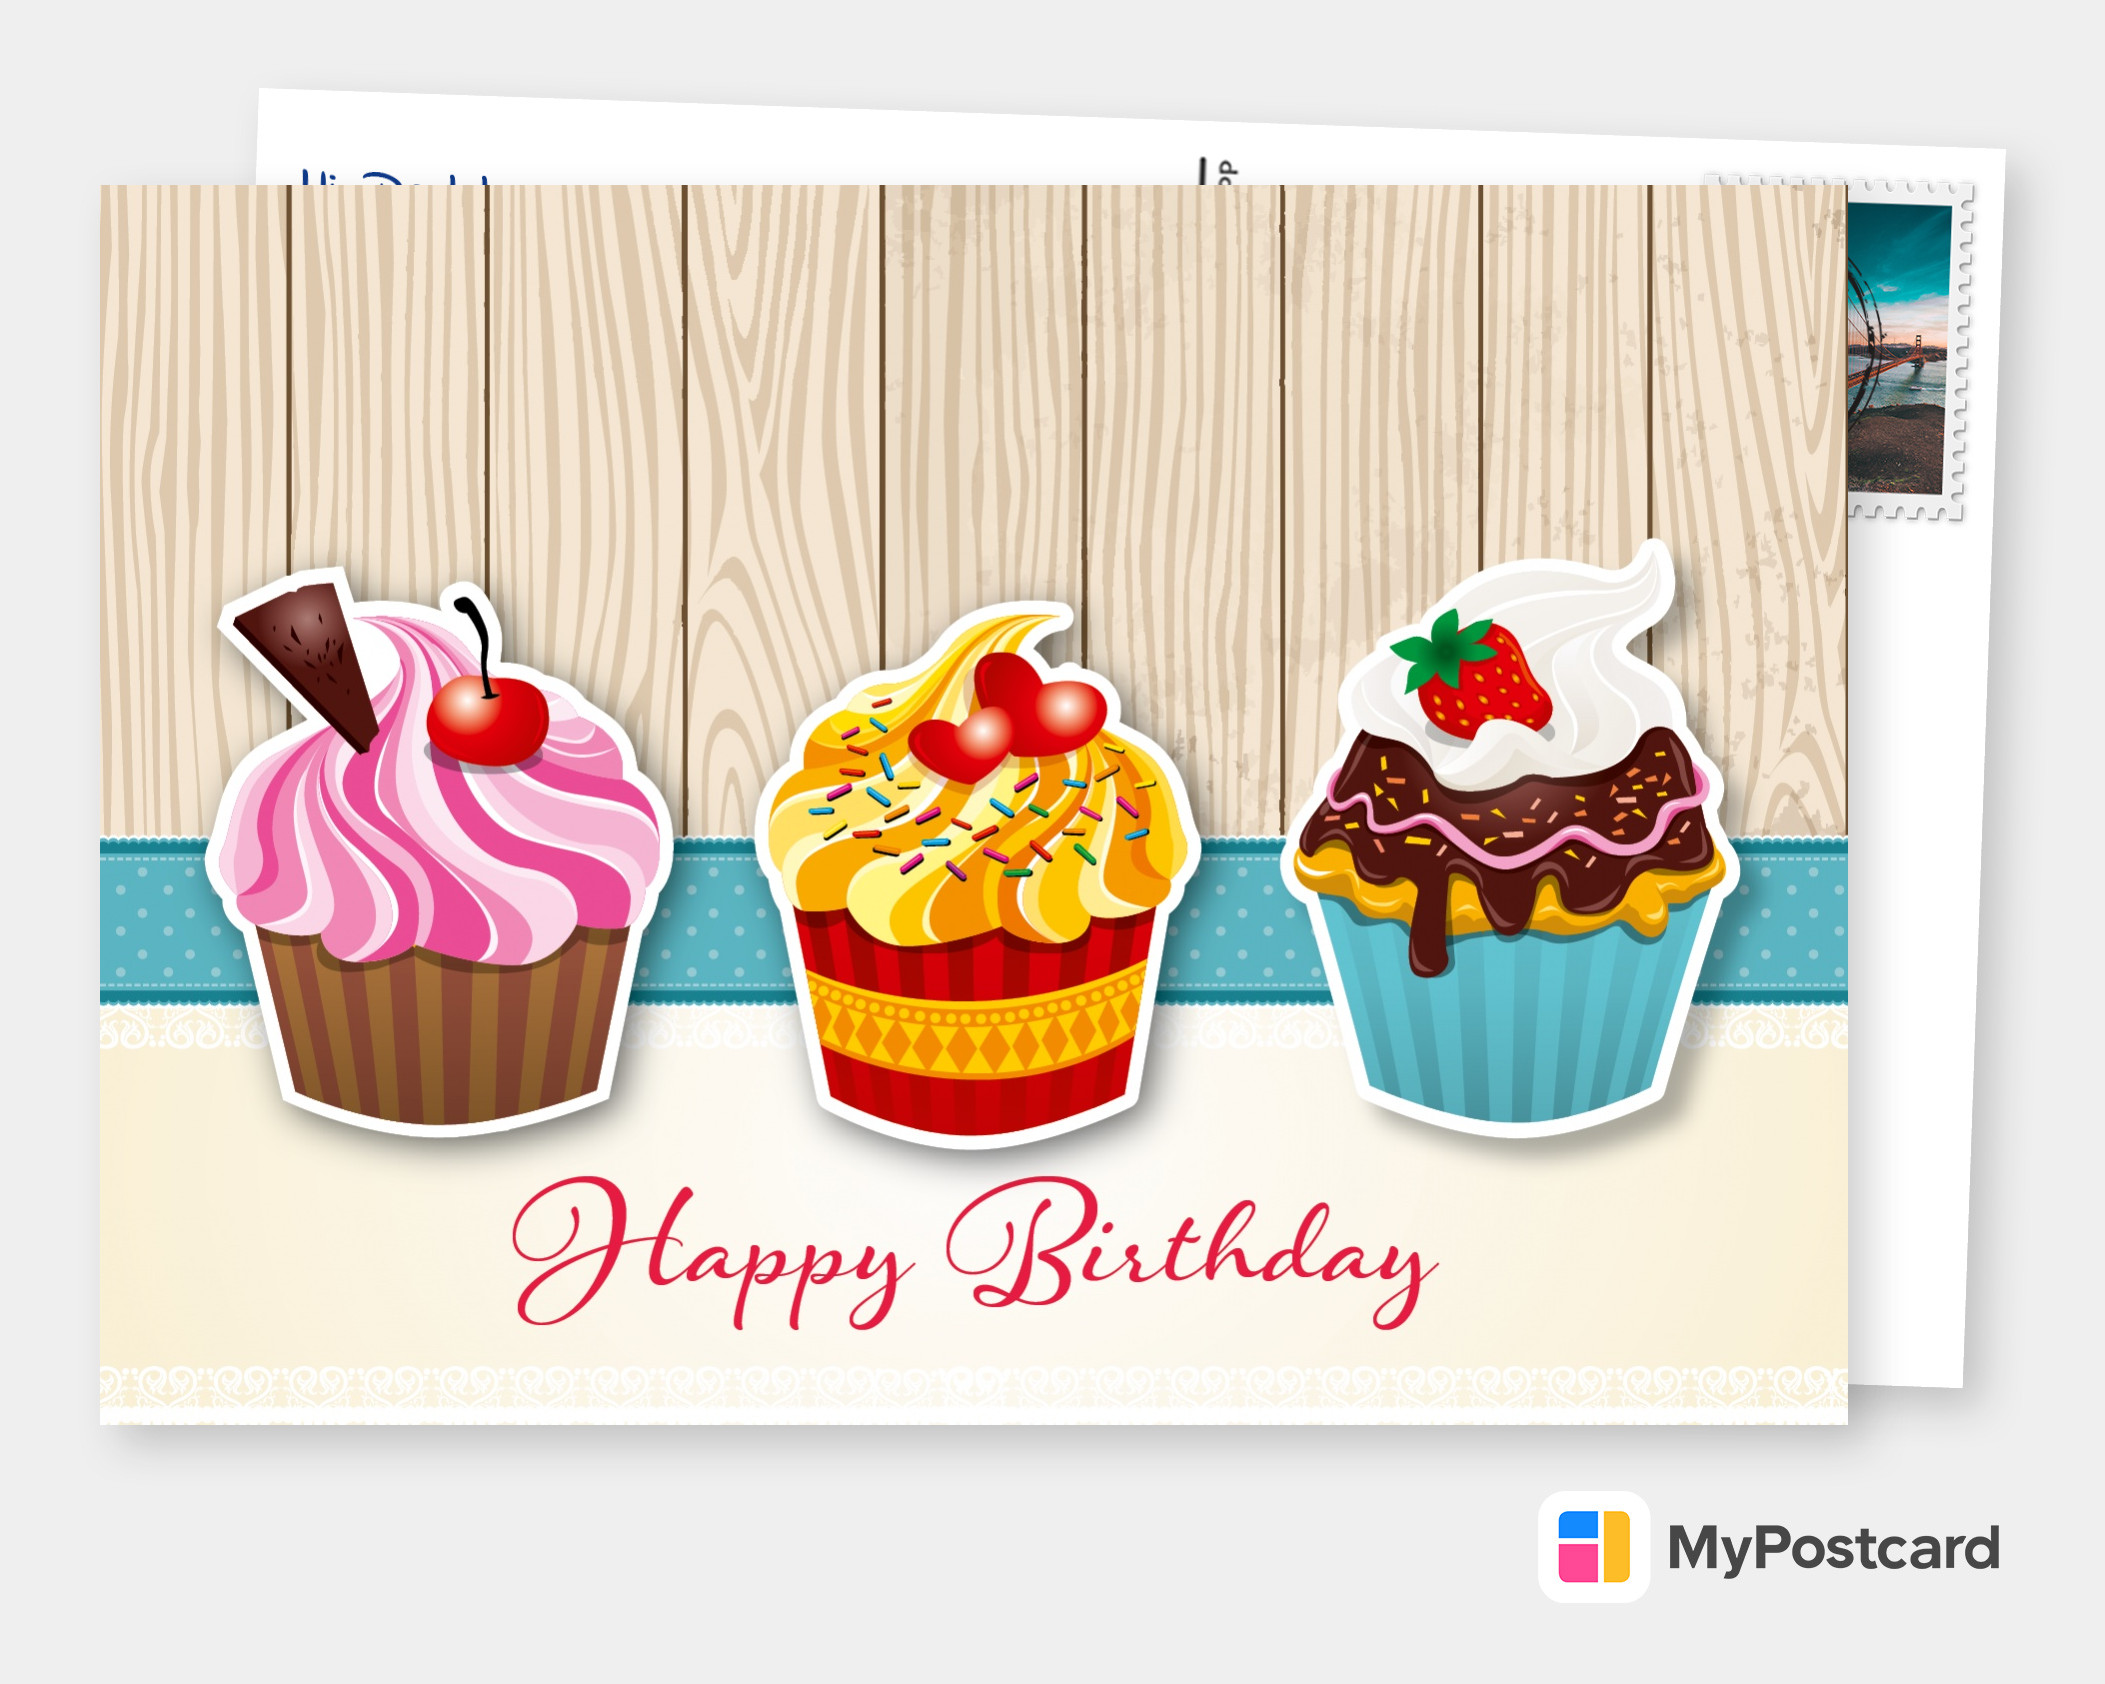 Make Your own Birthday Cards Online | Free Printable ...